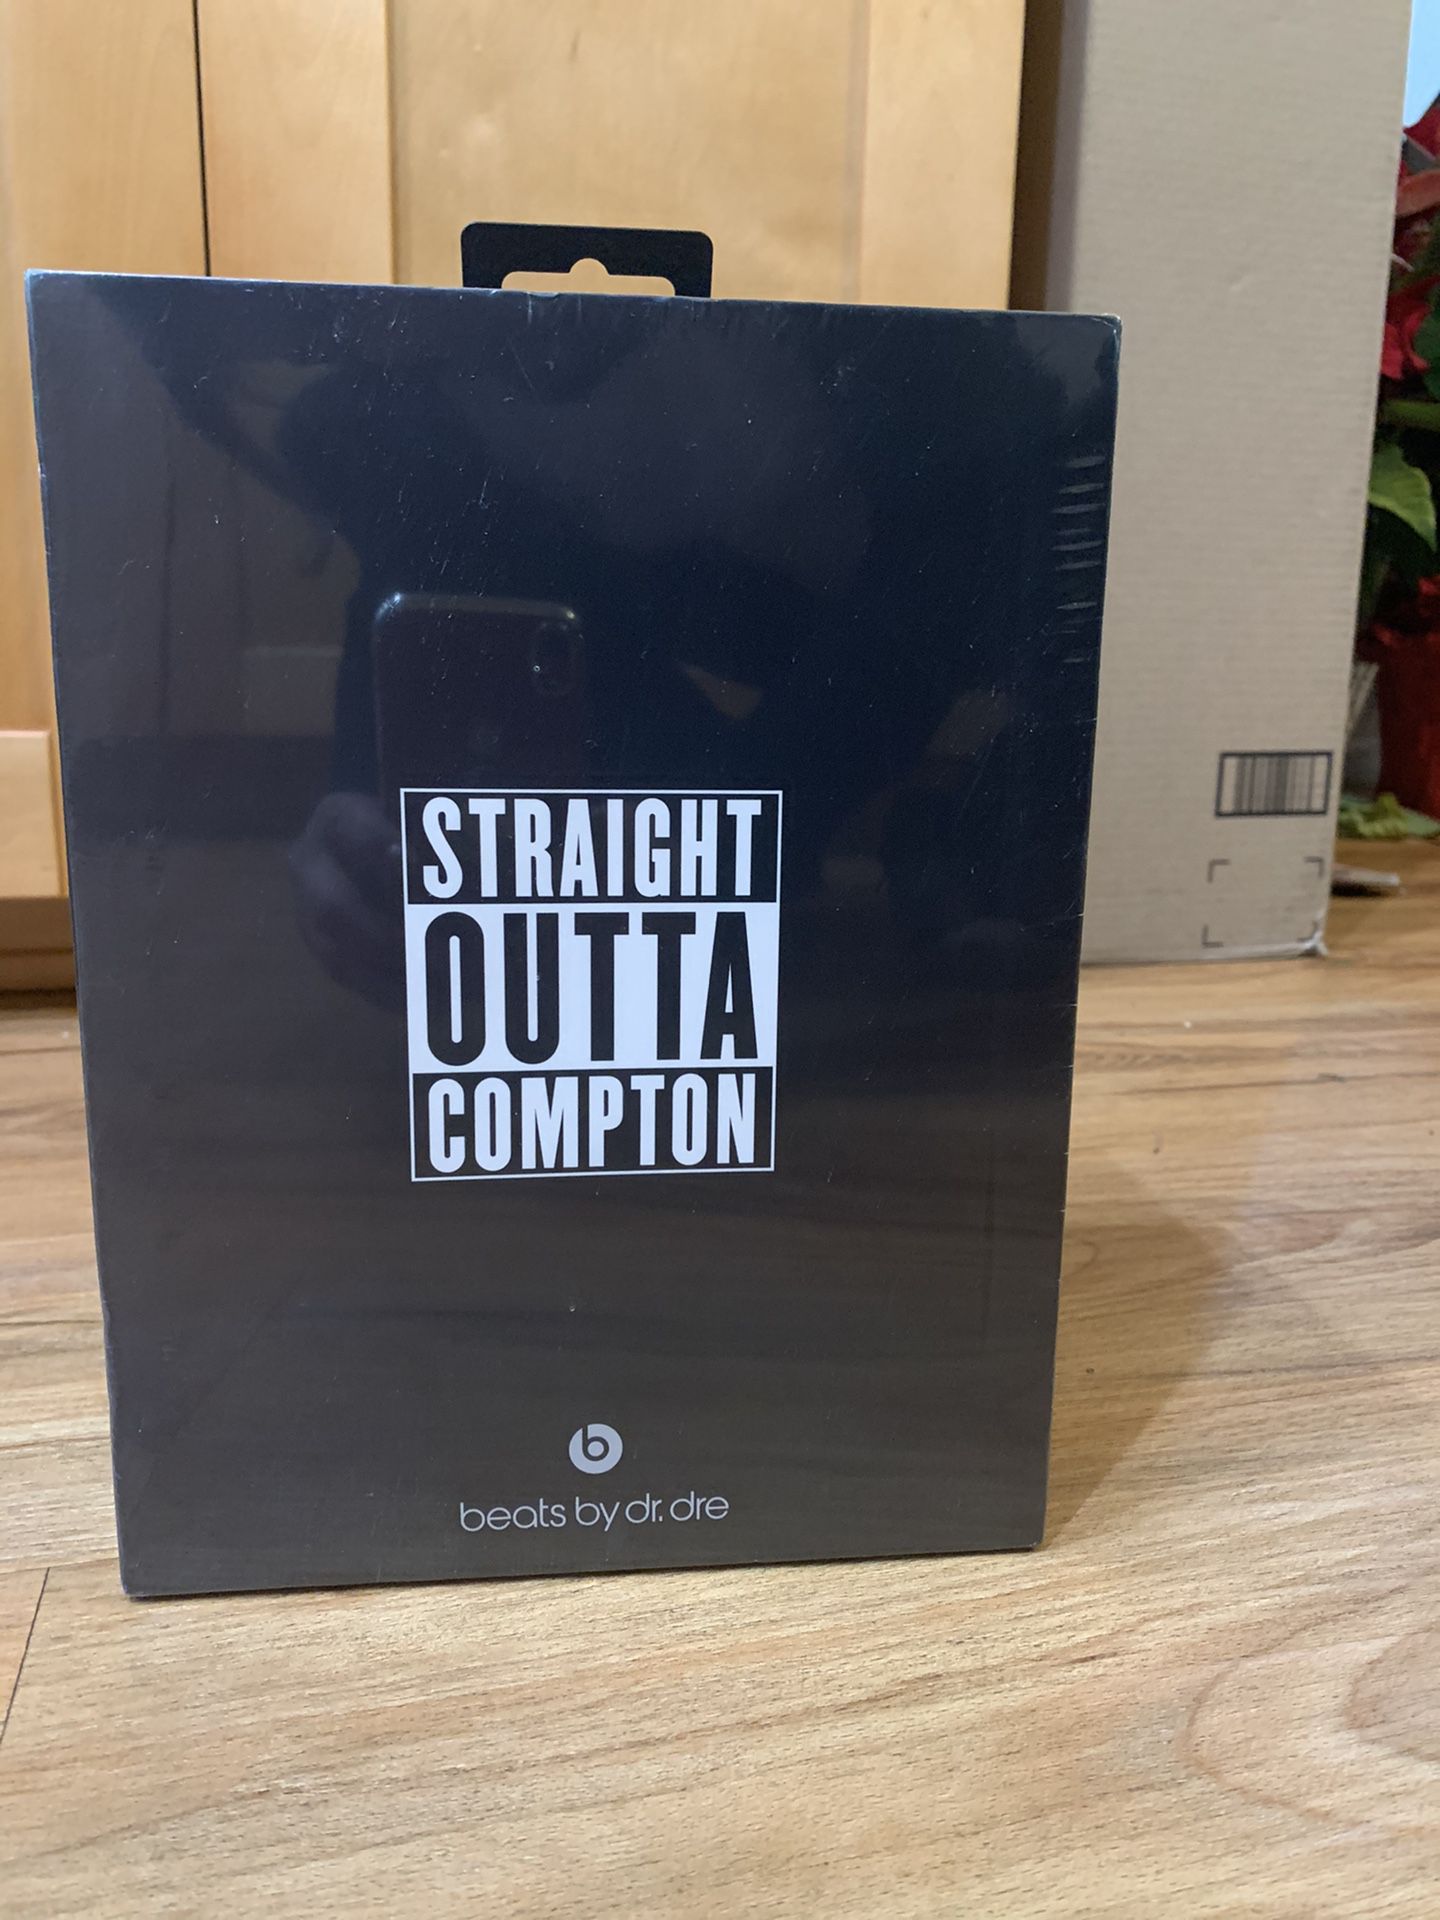 Beats by Dr Dre Special Edition Straight Outta Compton 